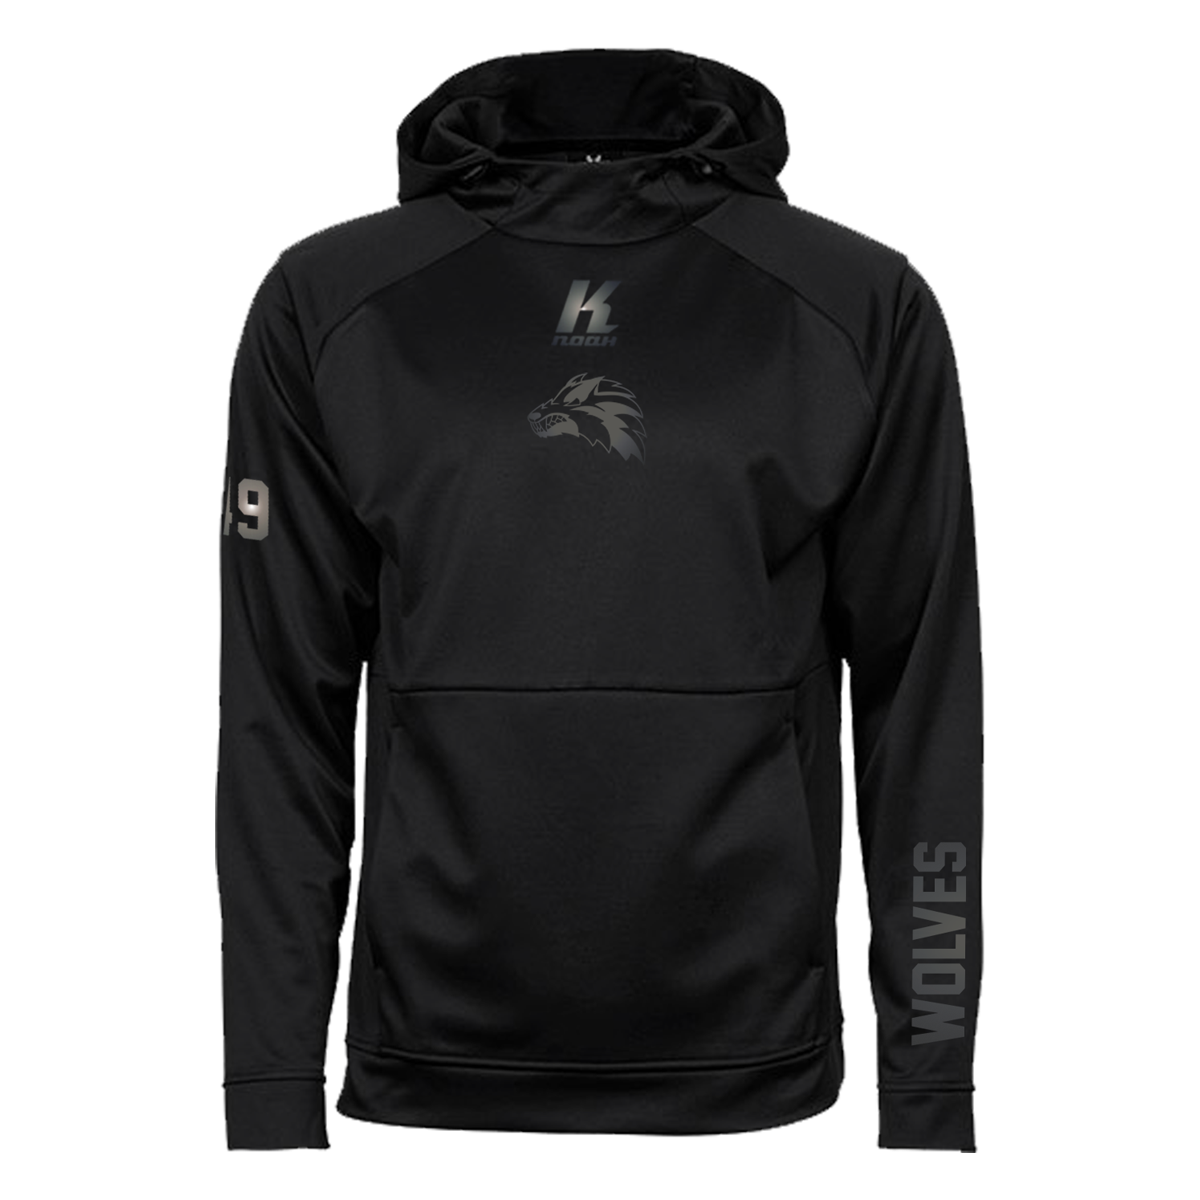 Wolves "Blackline" Performance Hoodie JH006 with Playernumber or Initials